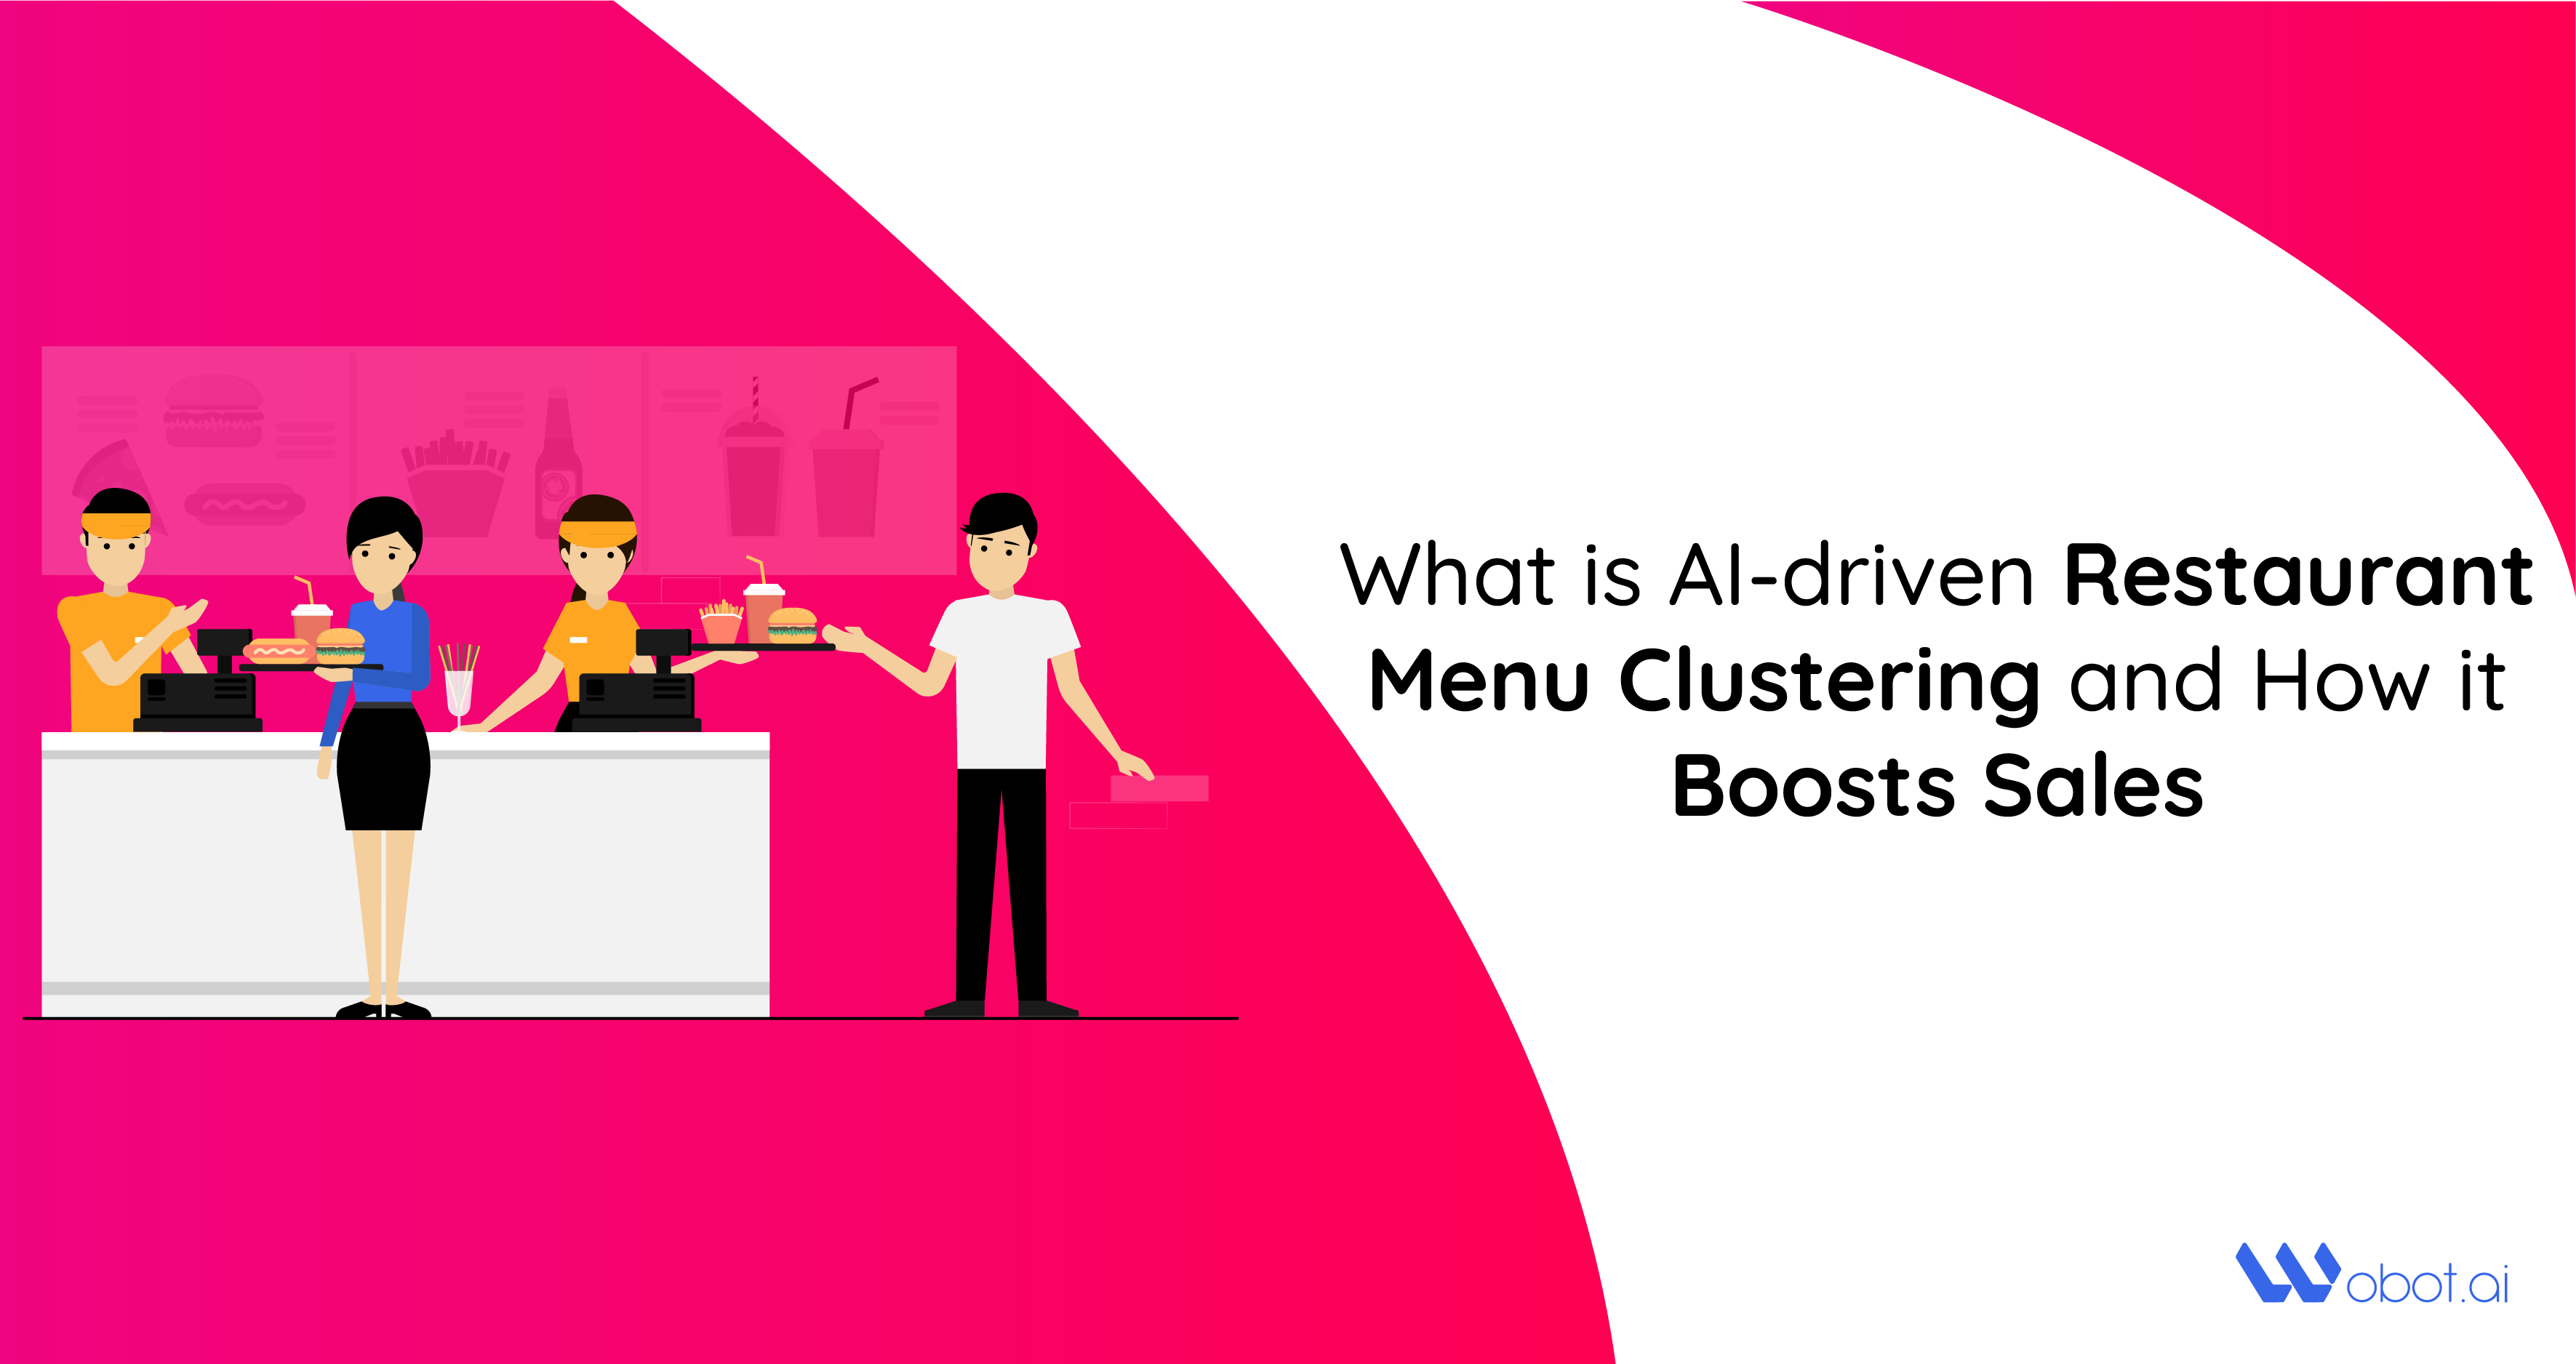 What is AI-driven Restaurant Menu Clustering and How it Boosts Sales